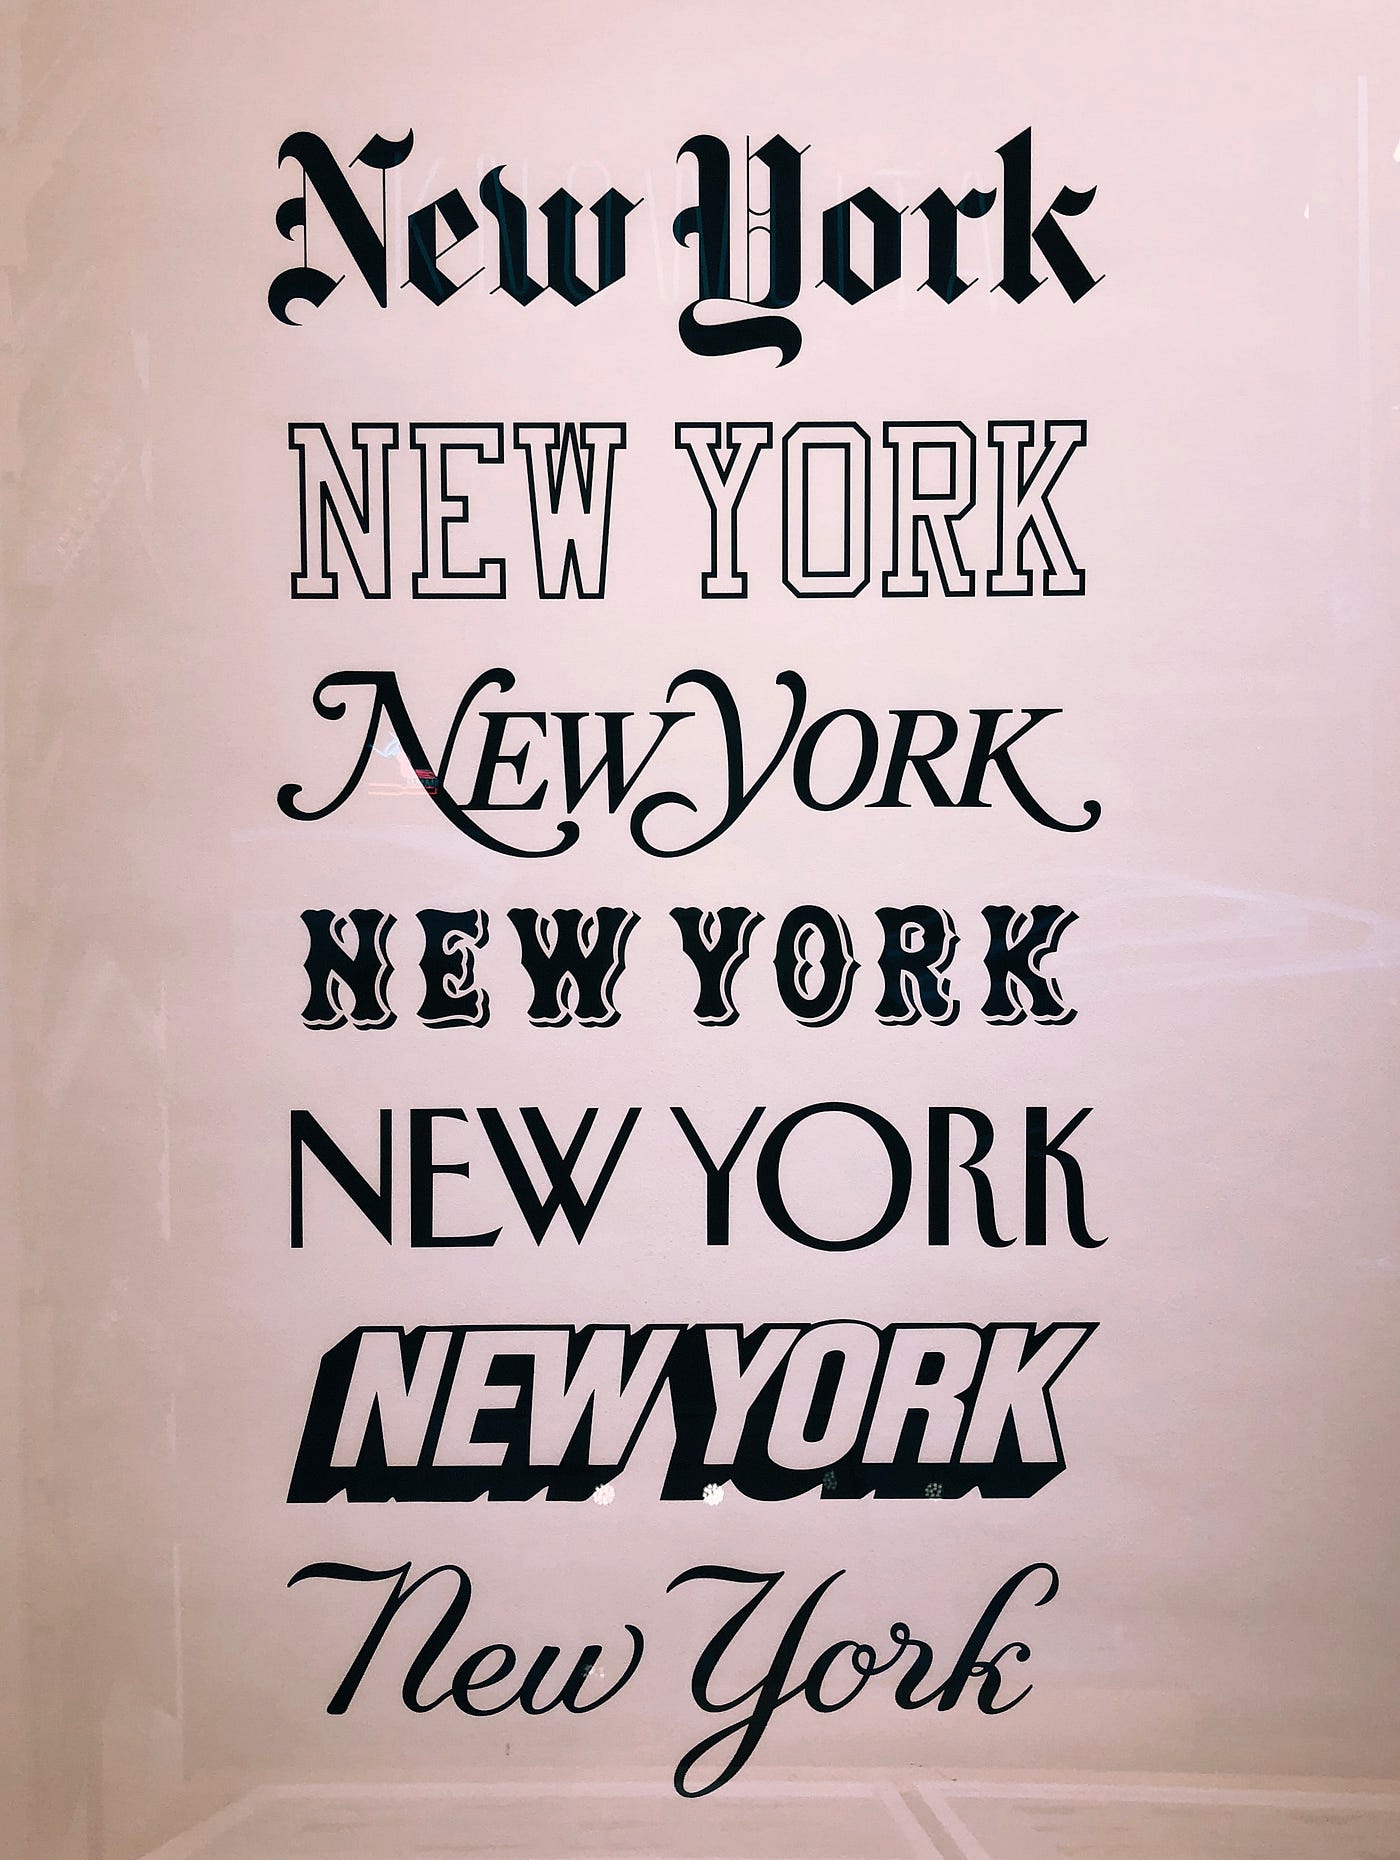 What Do Your Favorite Fonts Say About You?, by Iustina Ikert